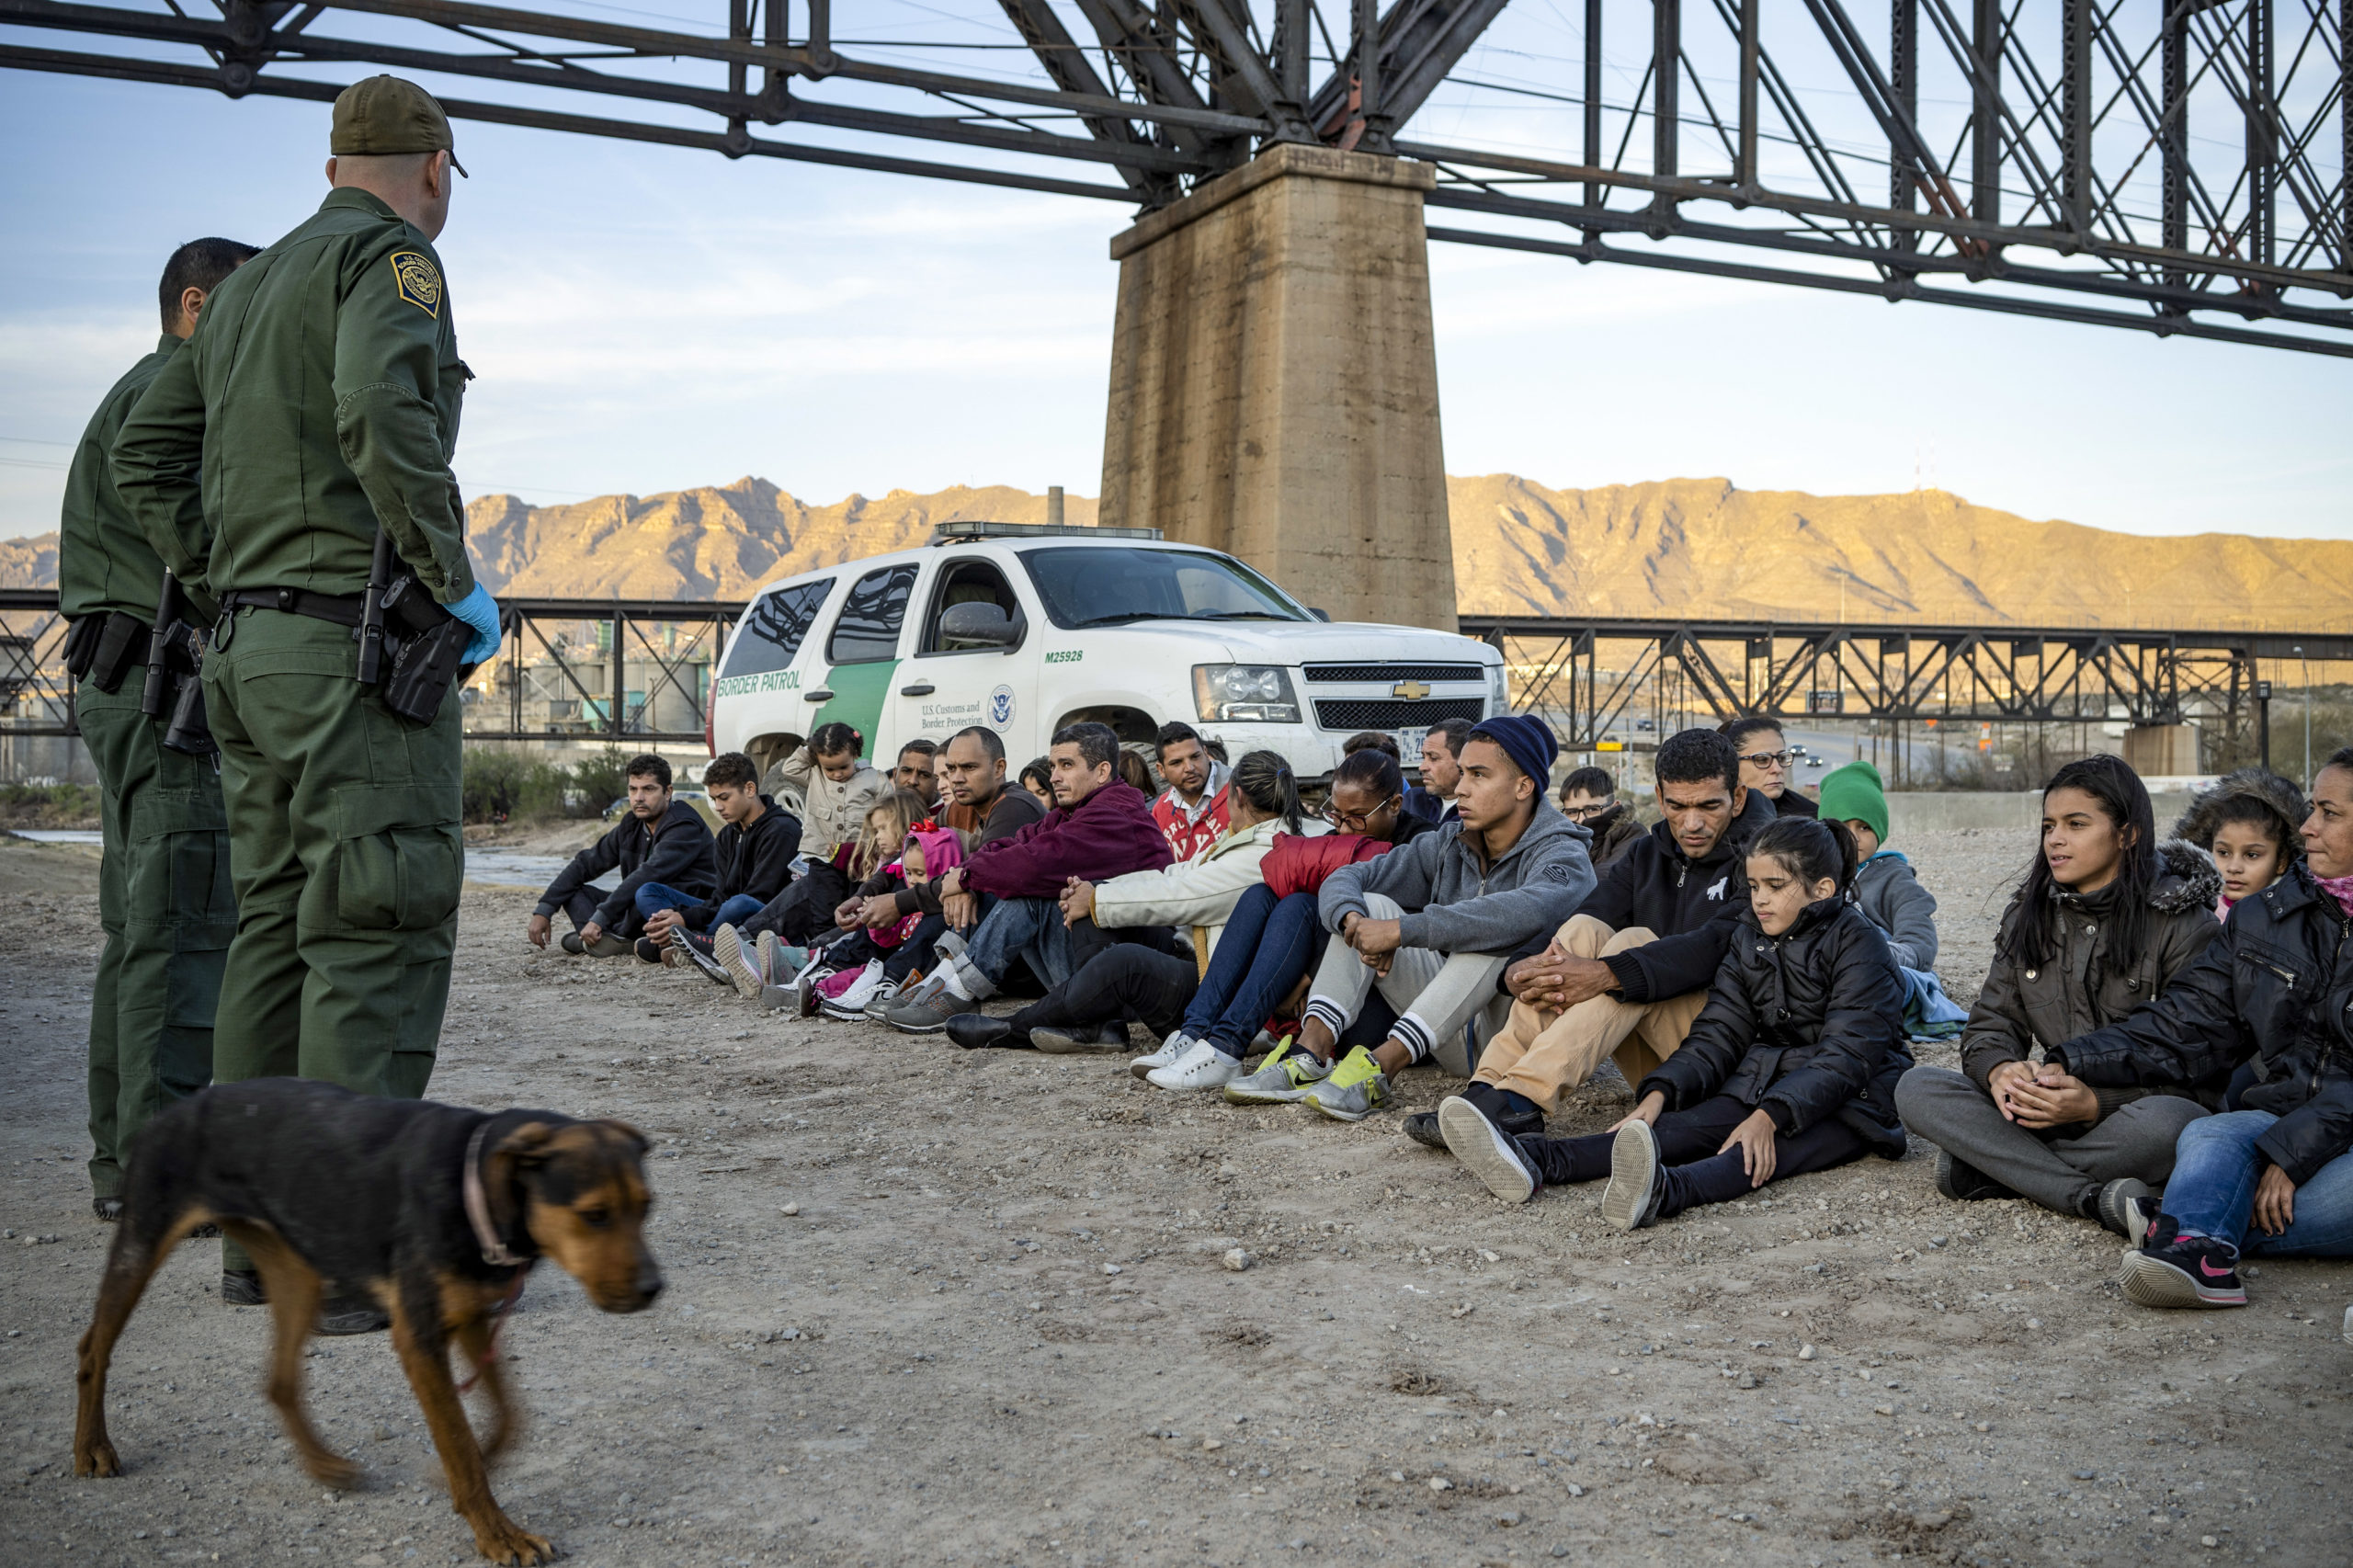 TOPSHOT - A group of about 30 Brazilian migrants, who had just crossed the border, sit on the ground near US Border Patrol agents, on the property of Jeff Allen, who used to run a brick factory near Mt. Christo Rey on the US-Mexico border in Sunland Park, New Mexico on March 20, 2019. - The militia members say they will patrol the US-Mexico border near Mt. Christo Rey, "Until the wall is built." In recent months, thousands of Central Americans have arrived in Mexico in several caravans in the hope of finding a better life in the United States. US President Donald Trump has branded such migrants a threat to national security, demanding billions of dollars from Congress to build a wall on the southern US border. (Photo by Paul Ratje / AFP) 